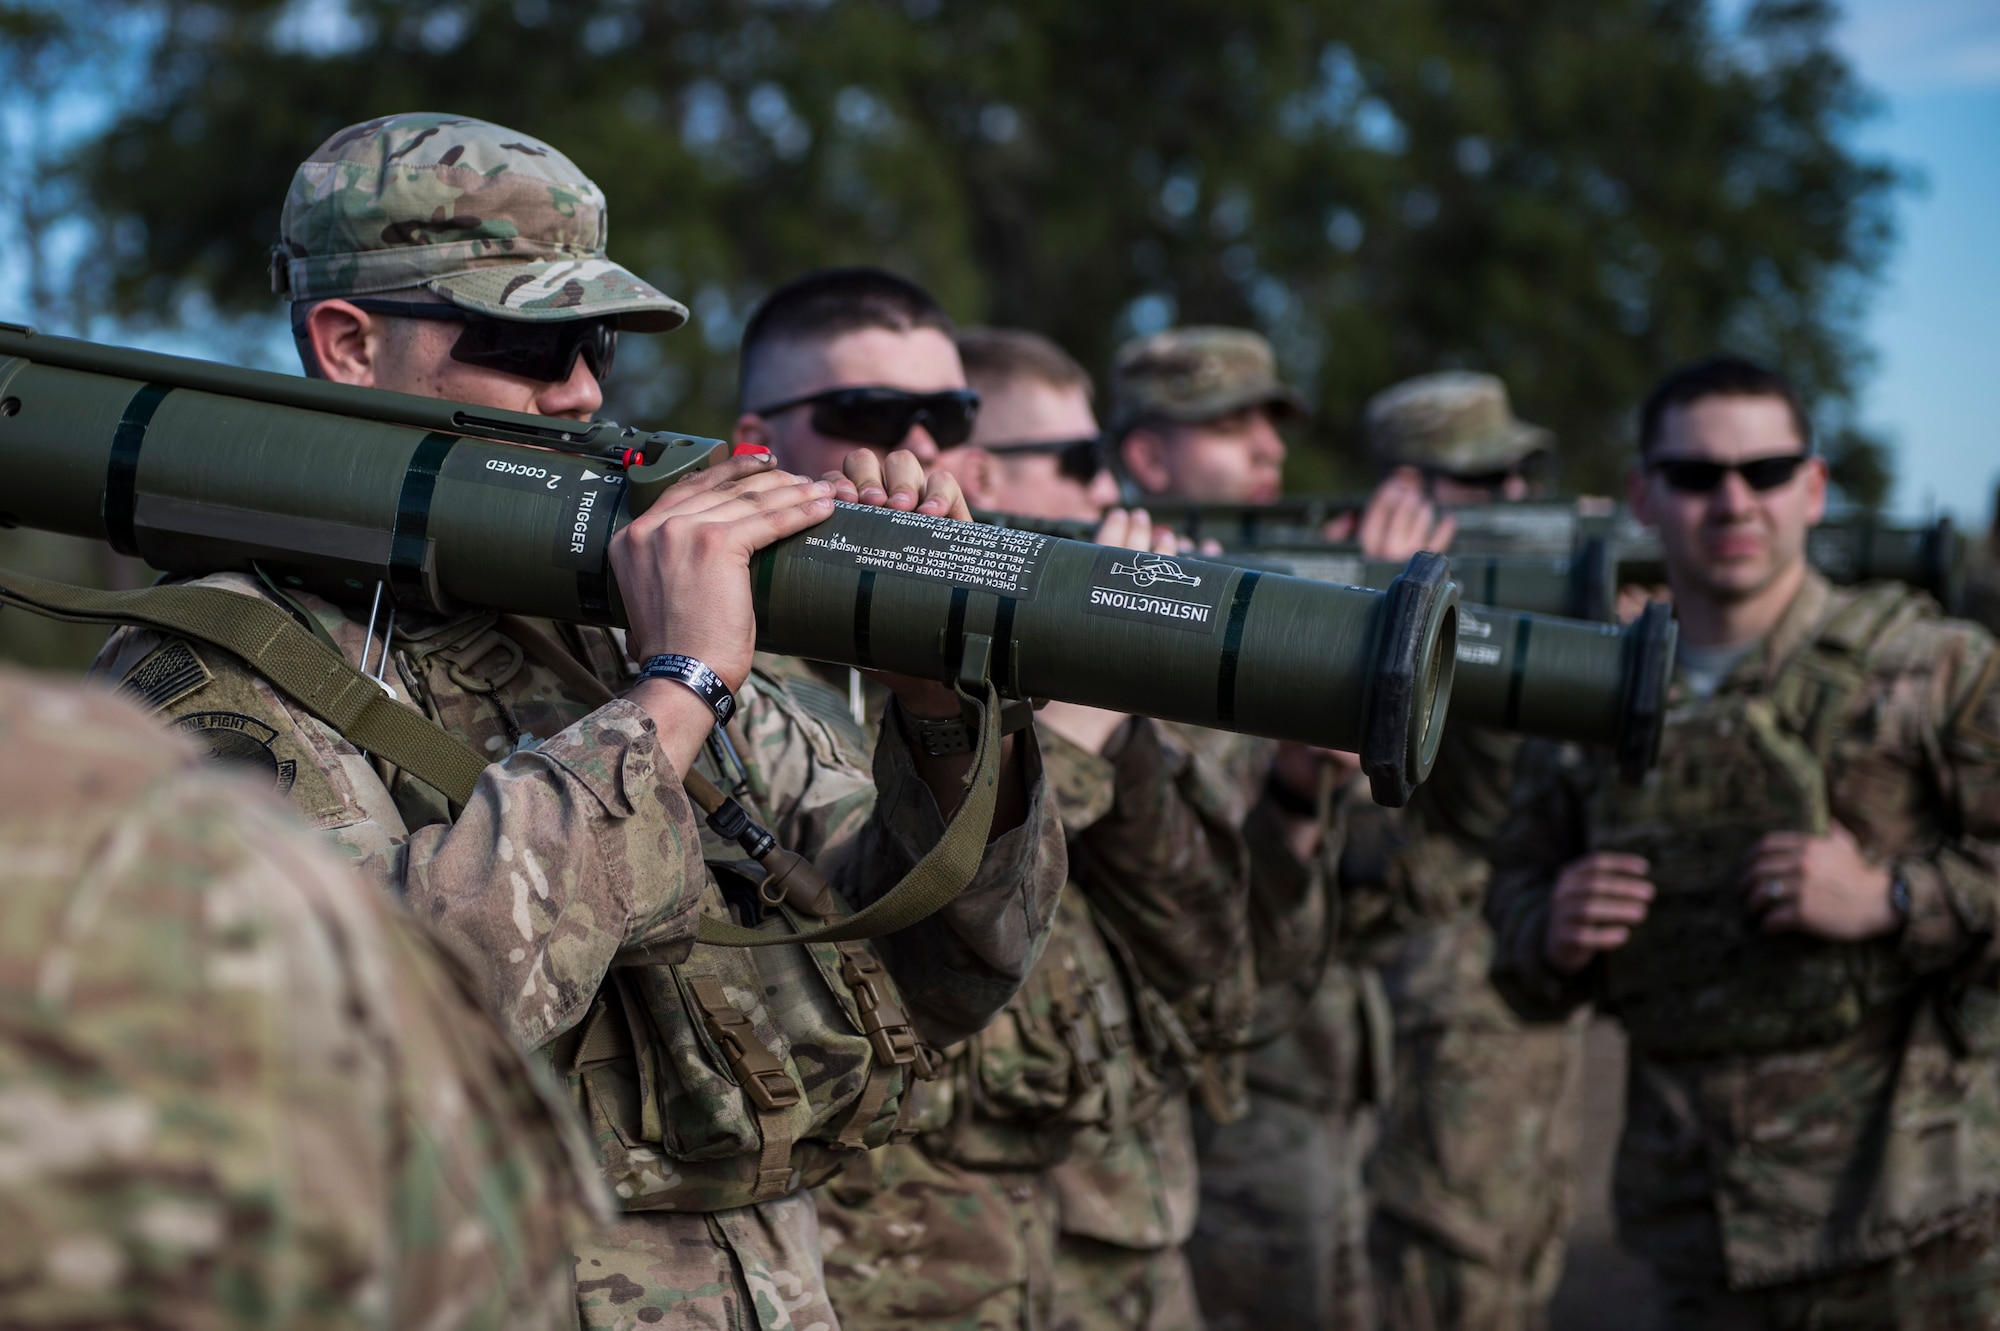 Airmen practice the firing procedures for an M136E1 AT4-CS confined space light anti-armor weapon, Jan. 24, 2018, at Camp Blanding Joint Training Center, Fla. During Weapons Week, Airmen qualify on heavy weapons to include the M2 machine gun, Mark 19 40mm grenade machine gun, M240B machine gun, M249 light machine gun, M136E1 AT4-CS confined space light anti-armor weapon, and M18 Claymore mine. (U.S. Air Force photo by Senior Airman Janiqua P. Robinson)